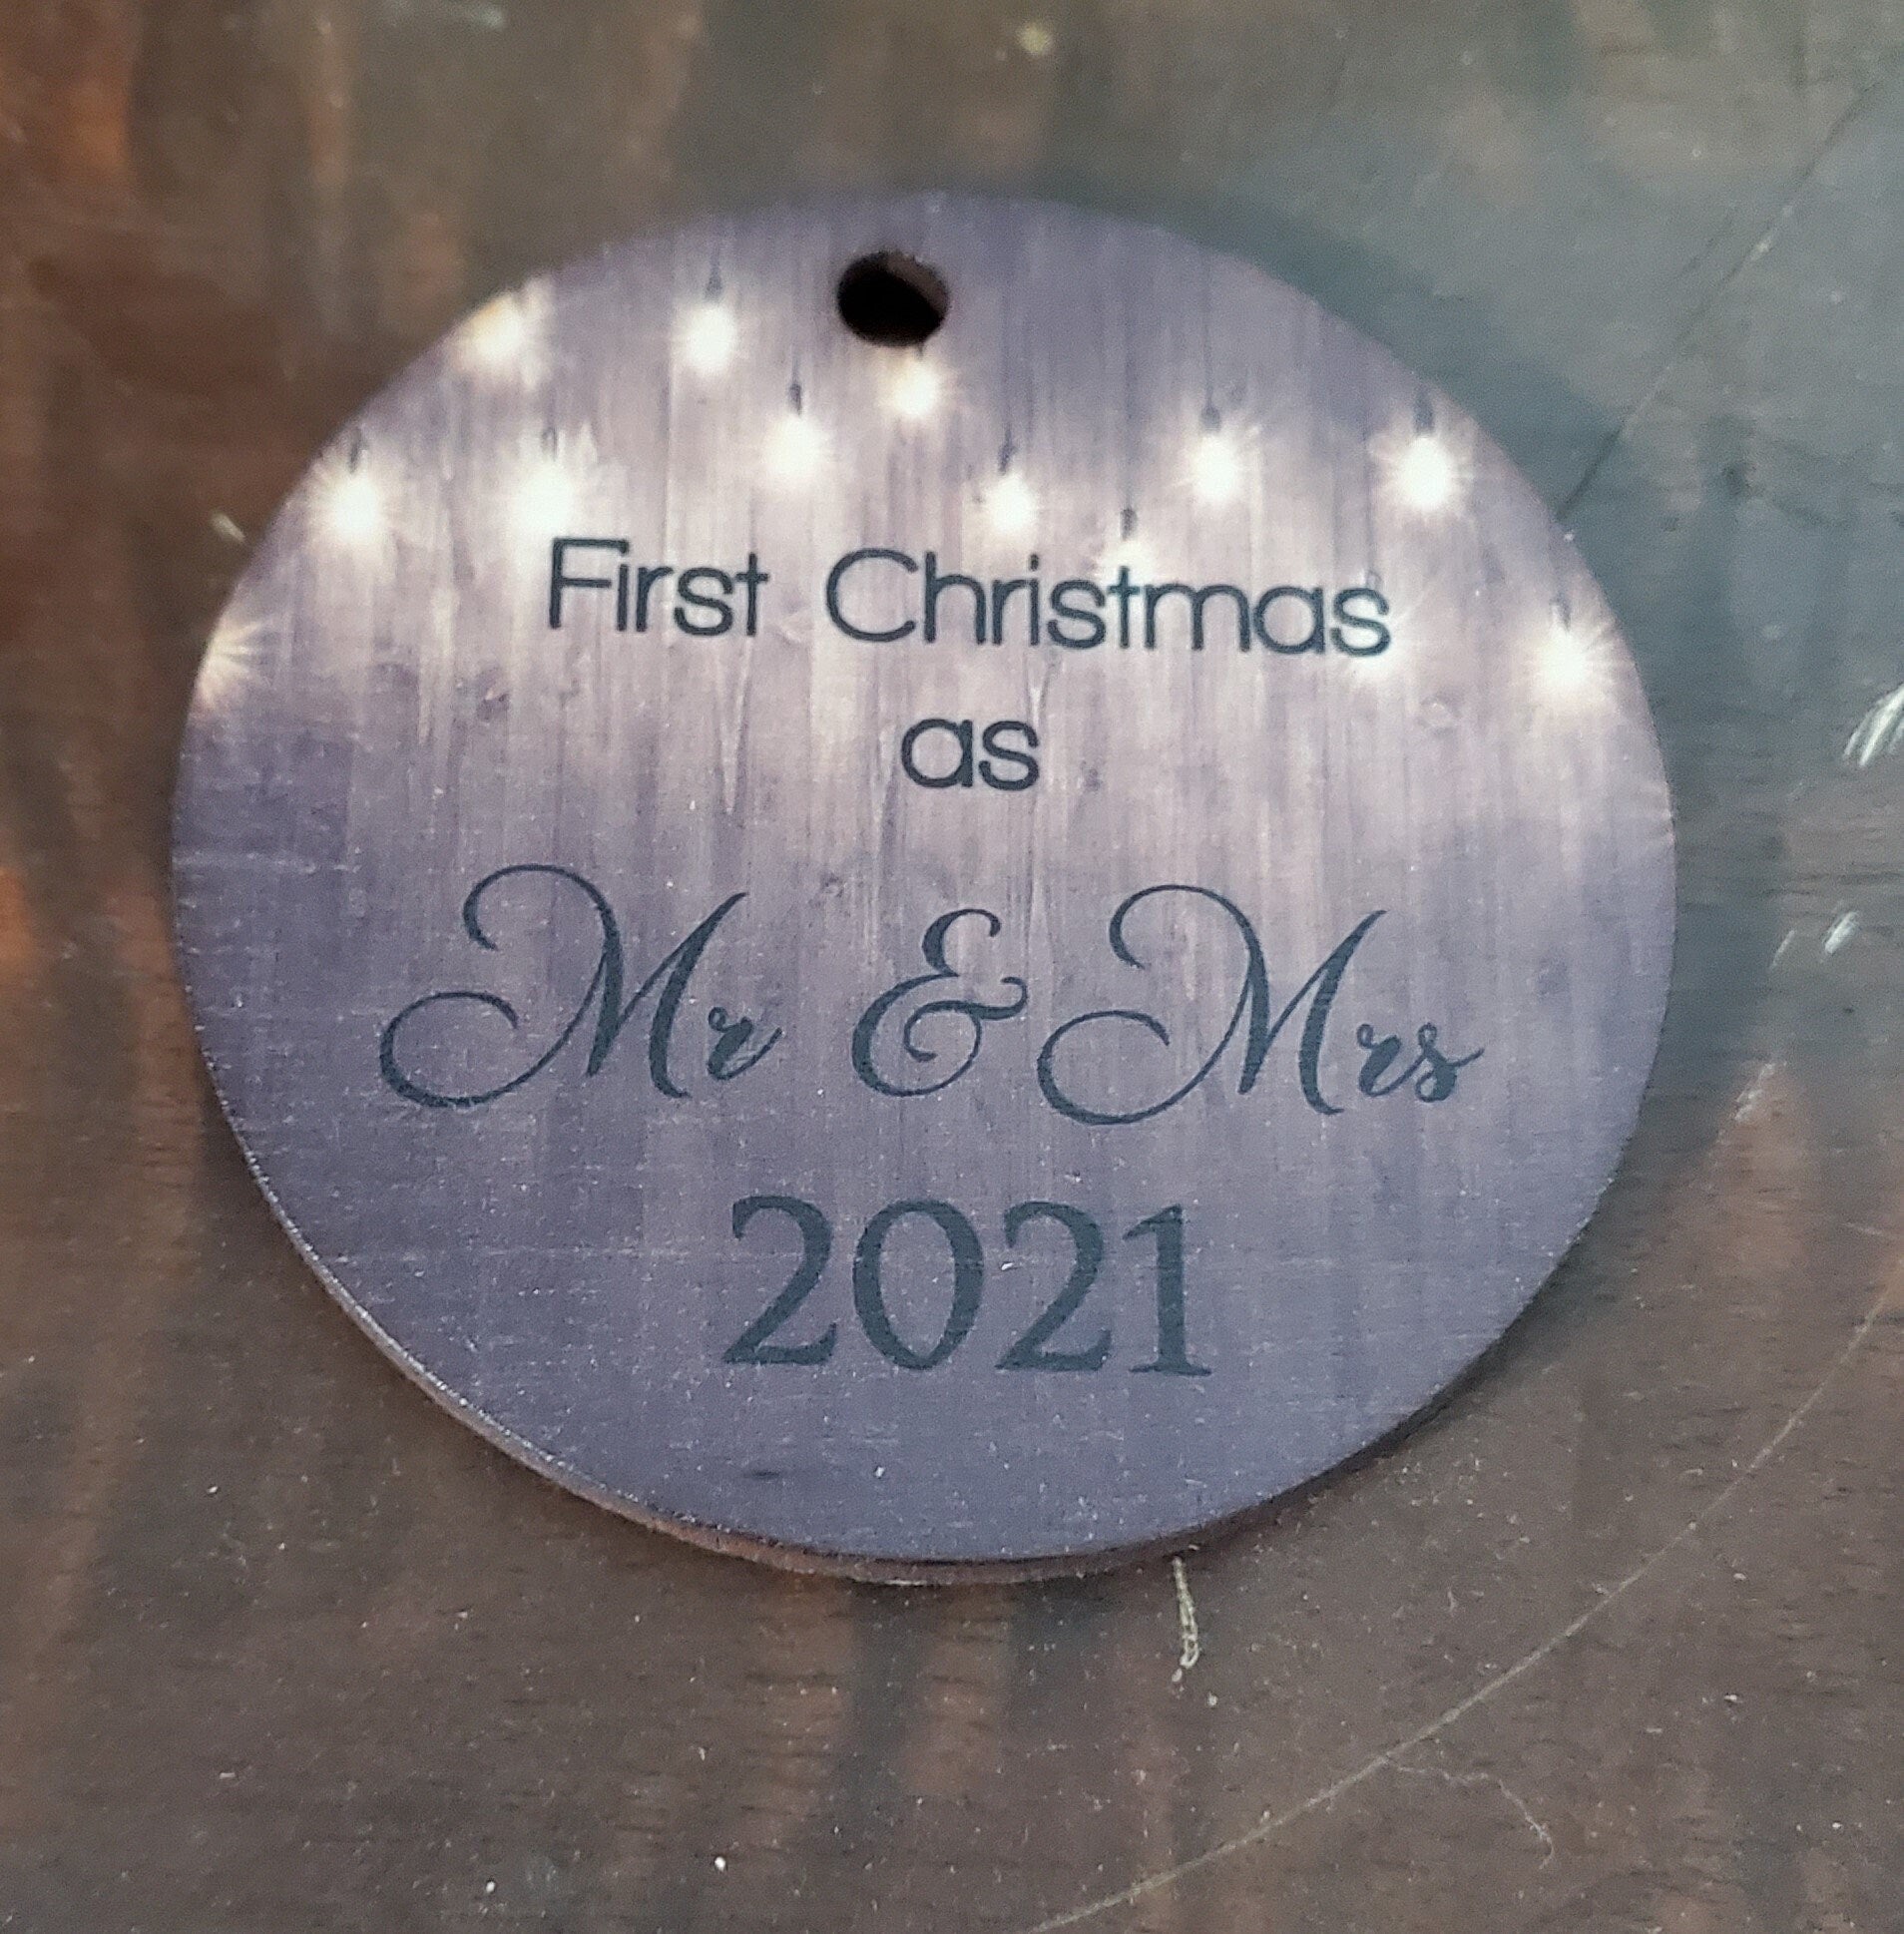 Our First Christmas Mr and Mrs First Christmas Wood 2021 Slice Light Bulb Background Primitive Christmas Ornament Rustic Christmas Tree